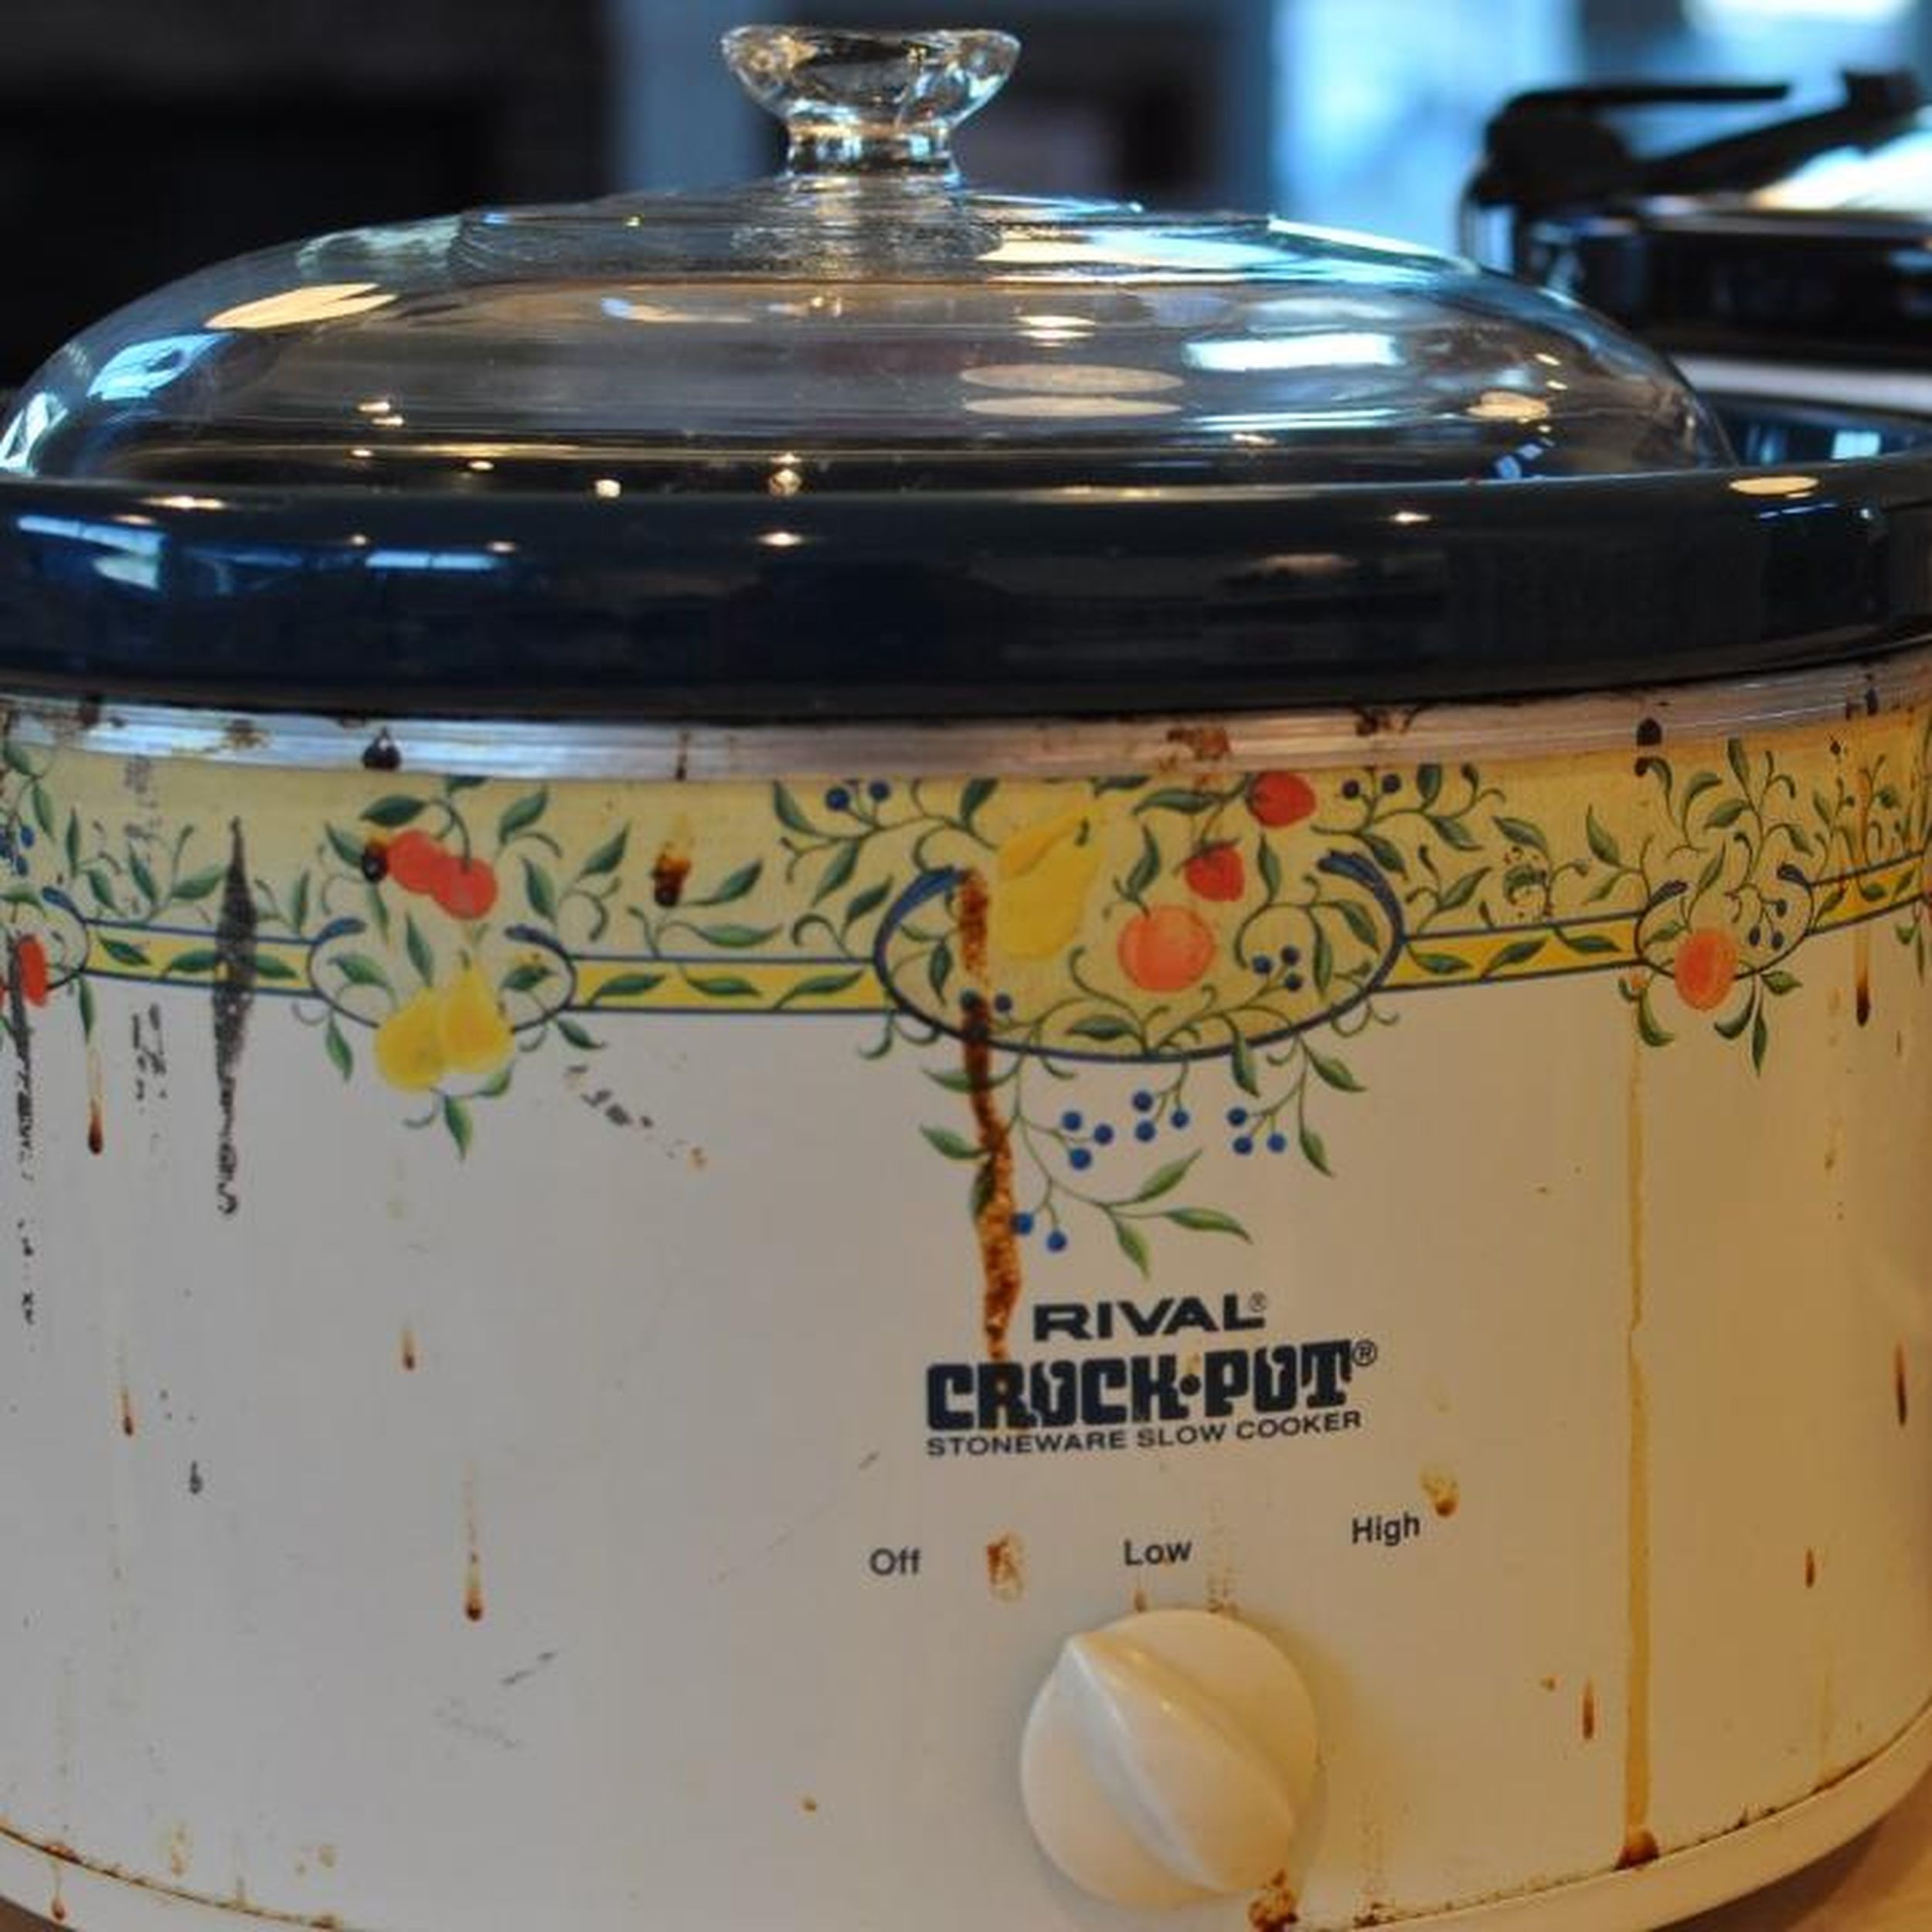 I Ditched My Fancy Slow Cooker In Favor Of My Mom's Old-School